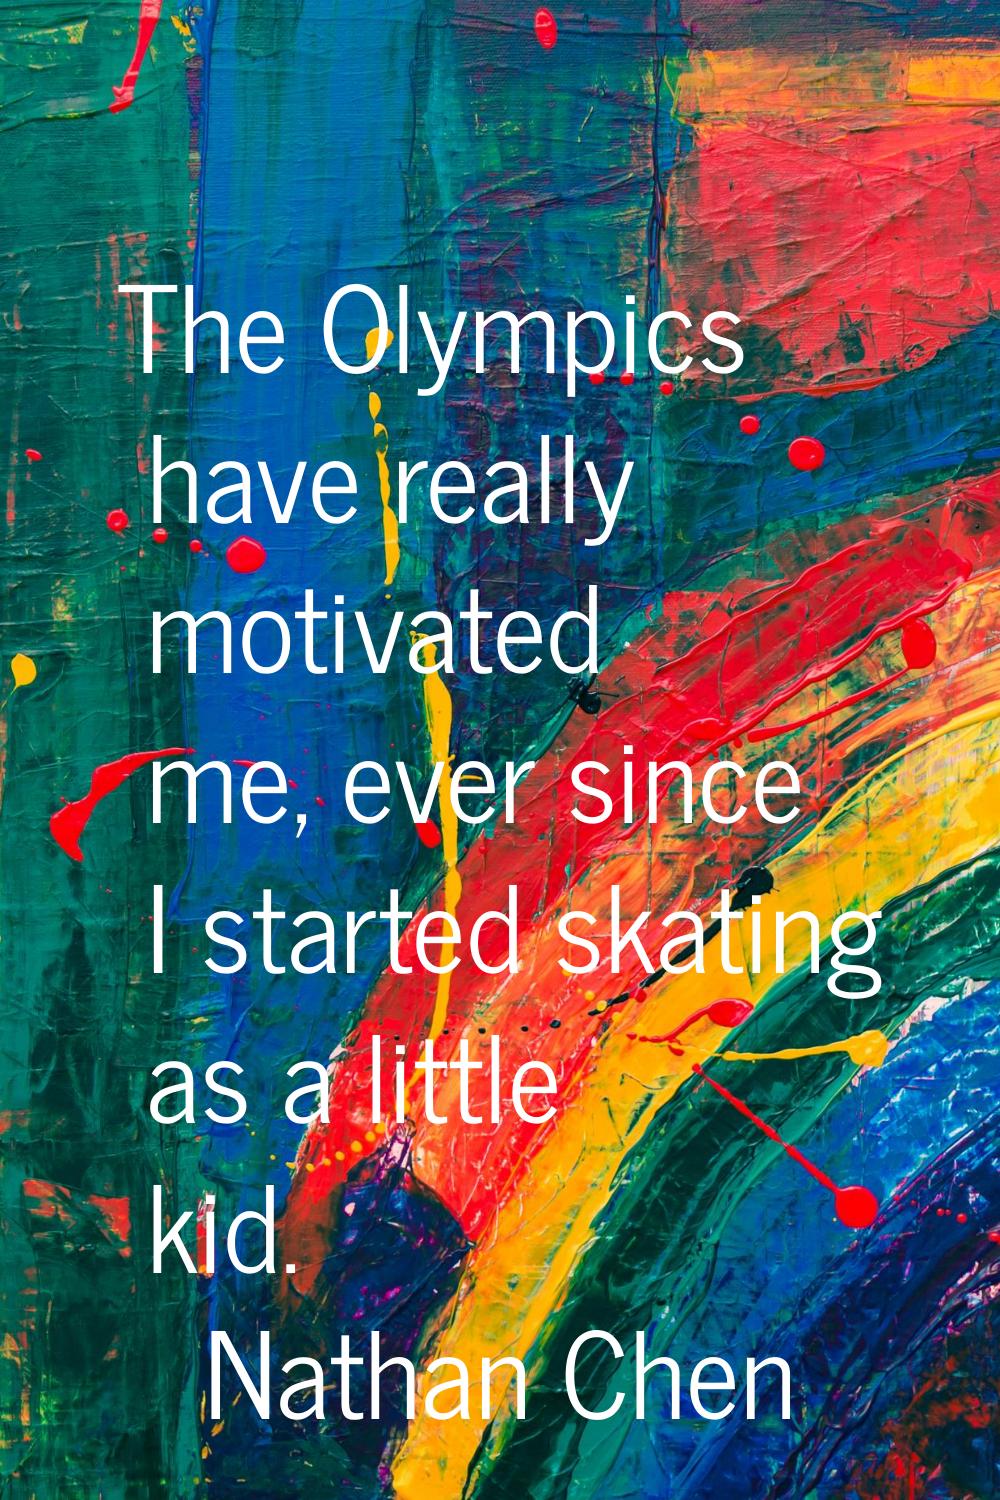 The Olympics have really motivated me, ever since I started skating as a little kid.